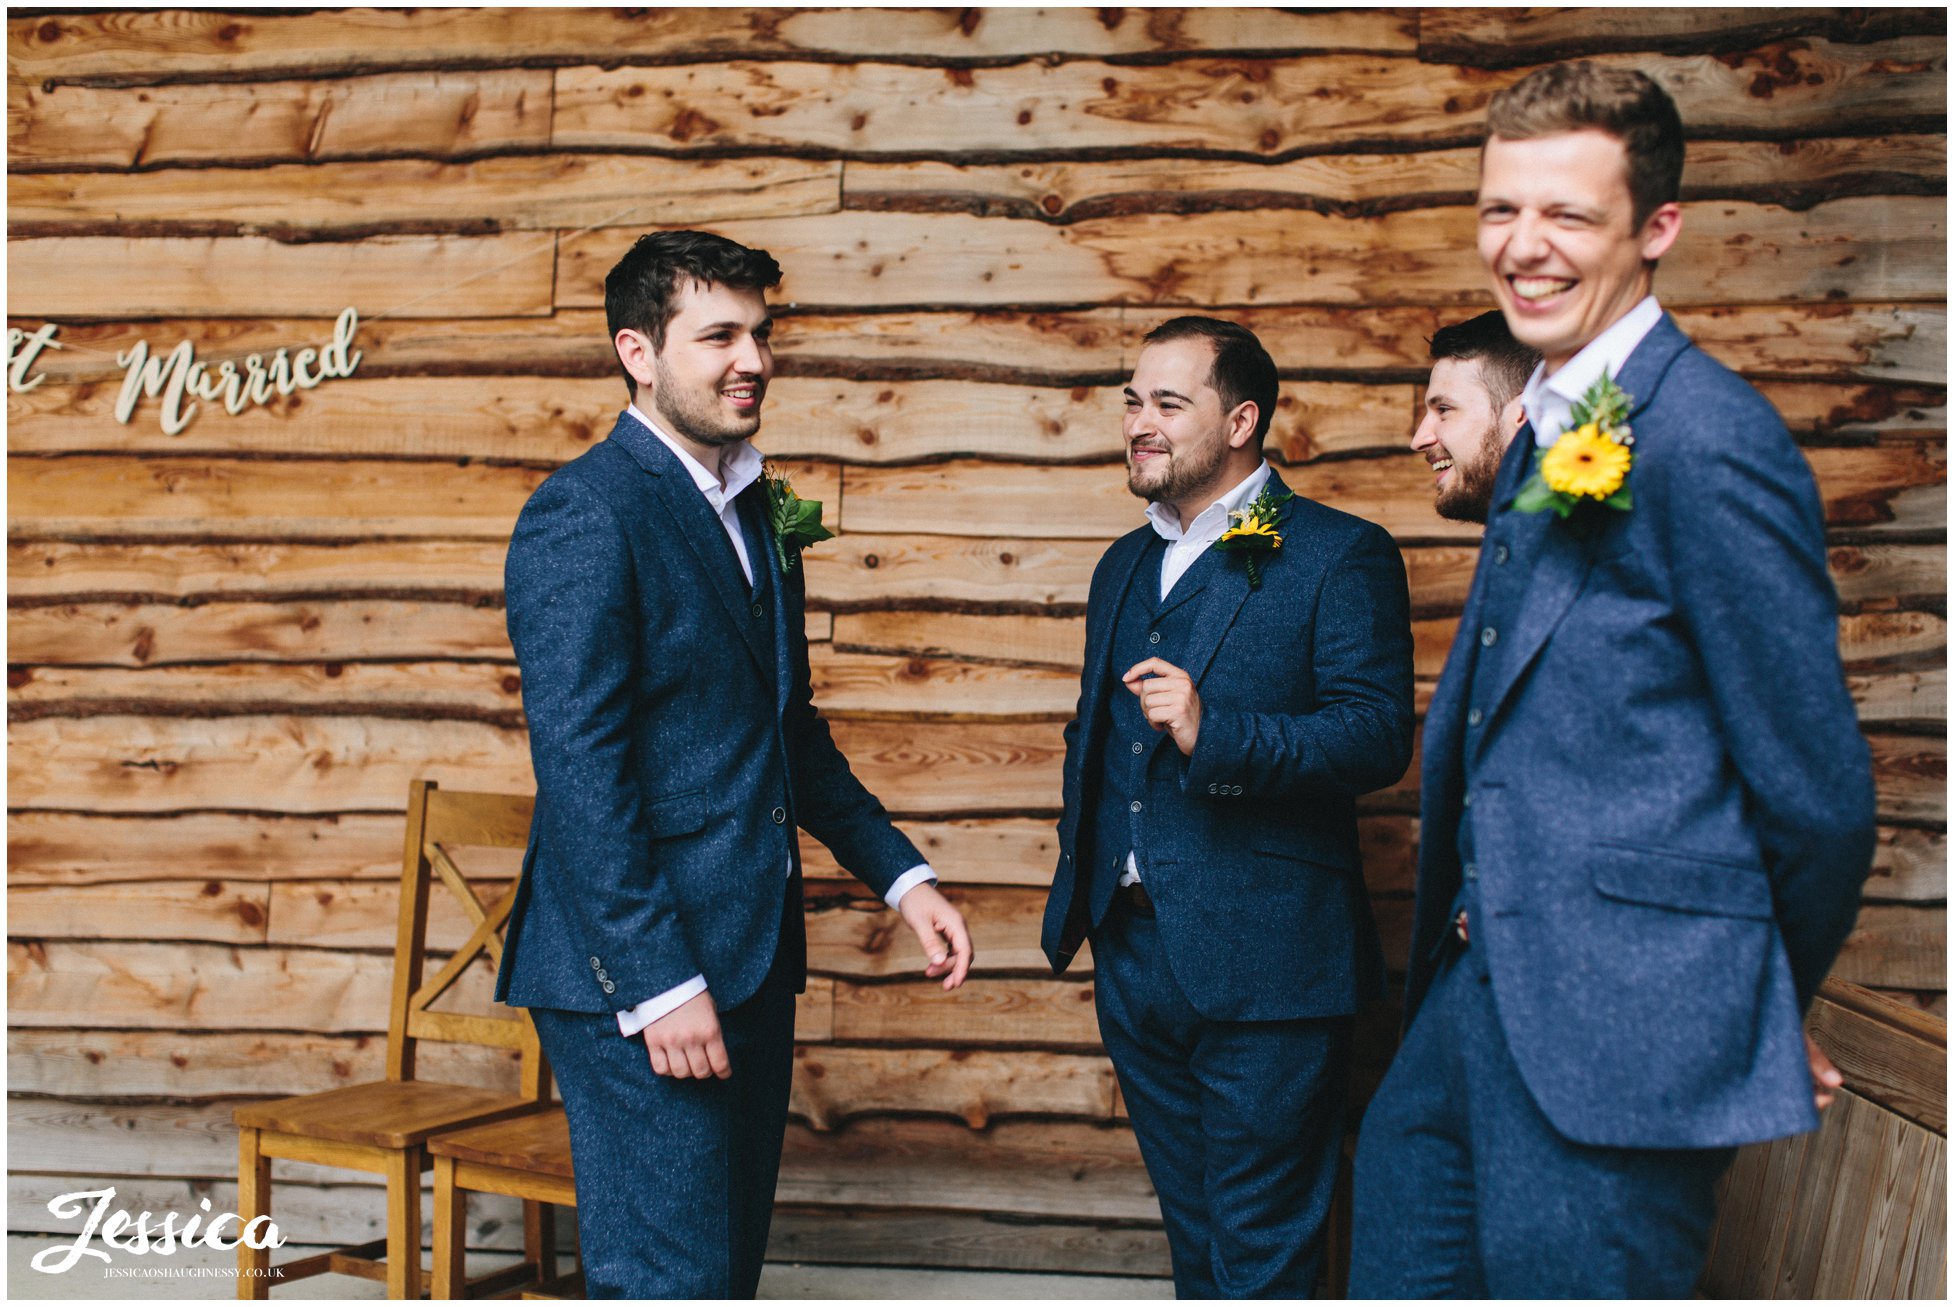 the groom laughs with his groomsmen before the ceremony at tower hill barns